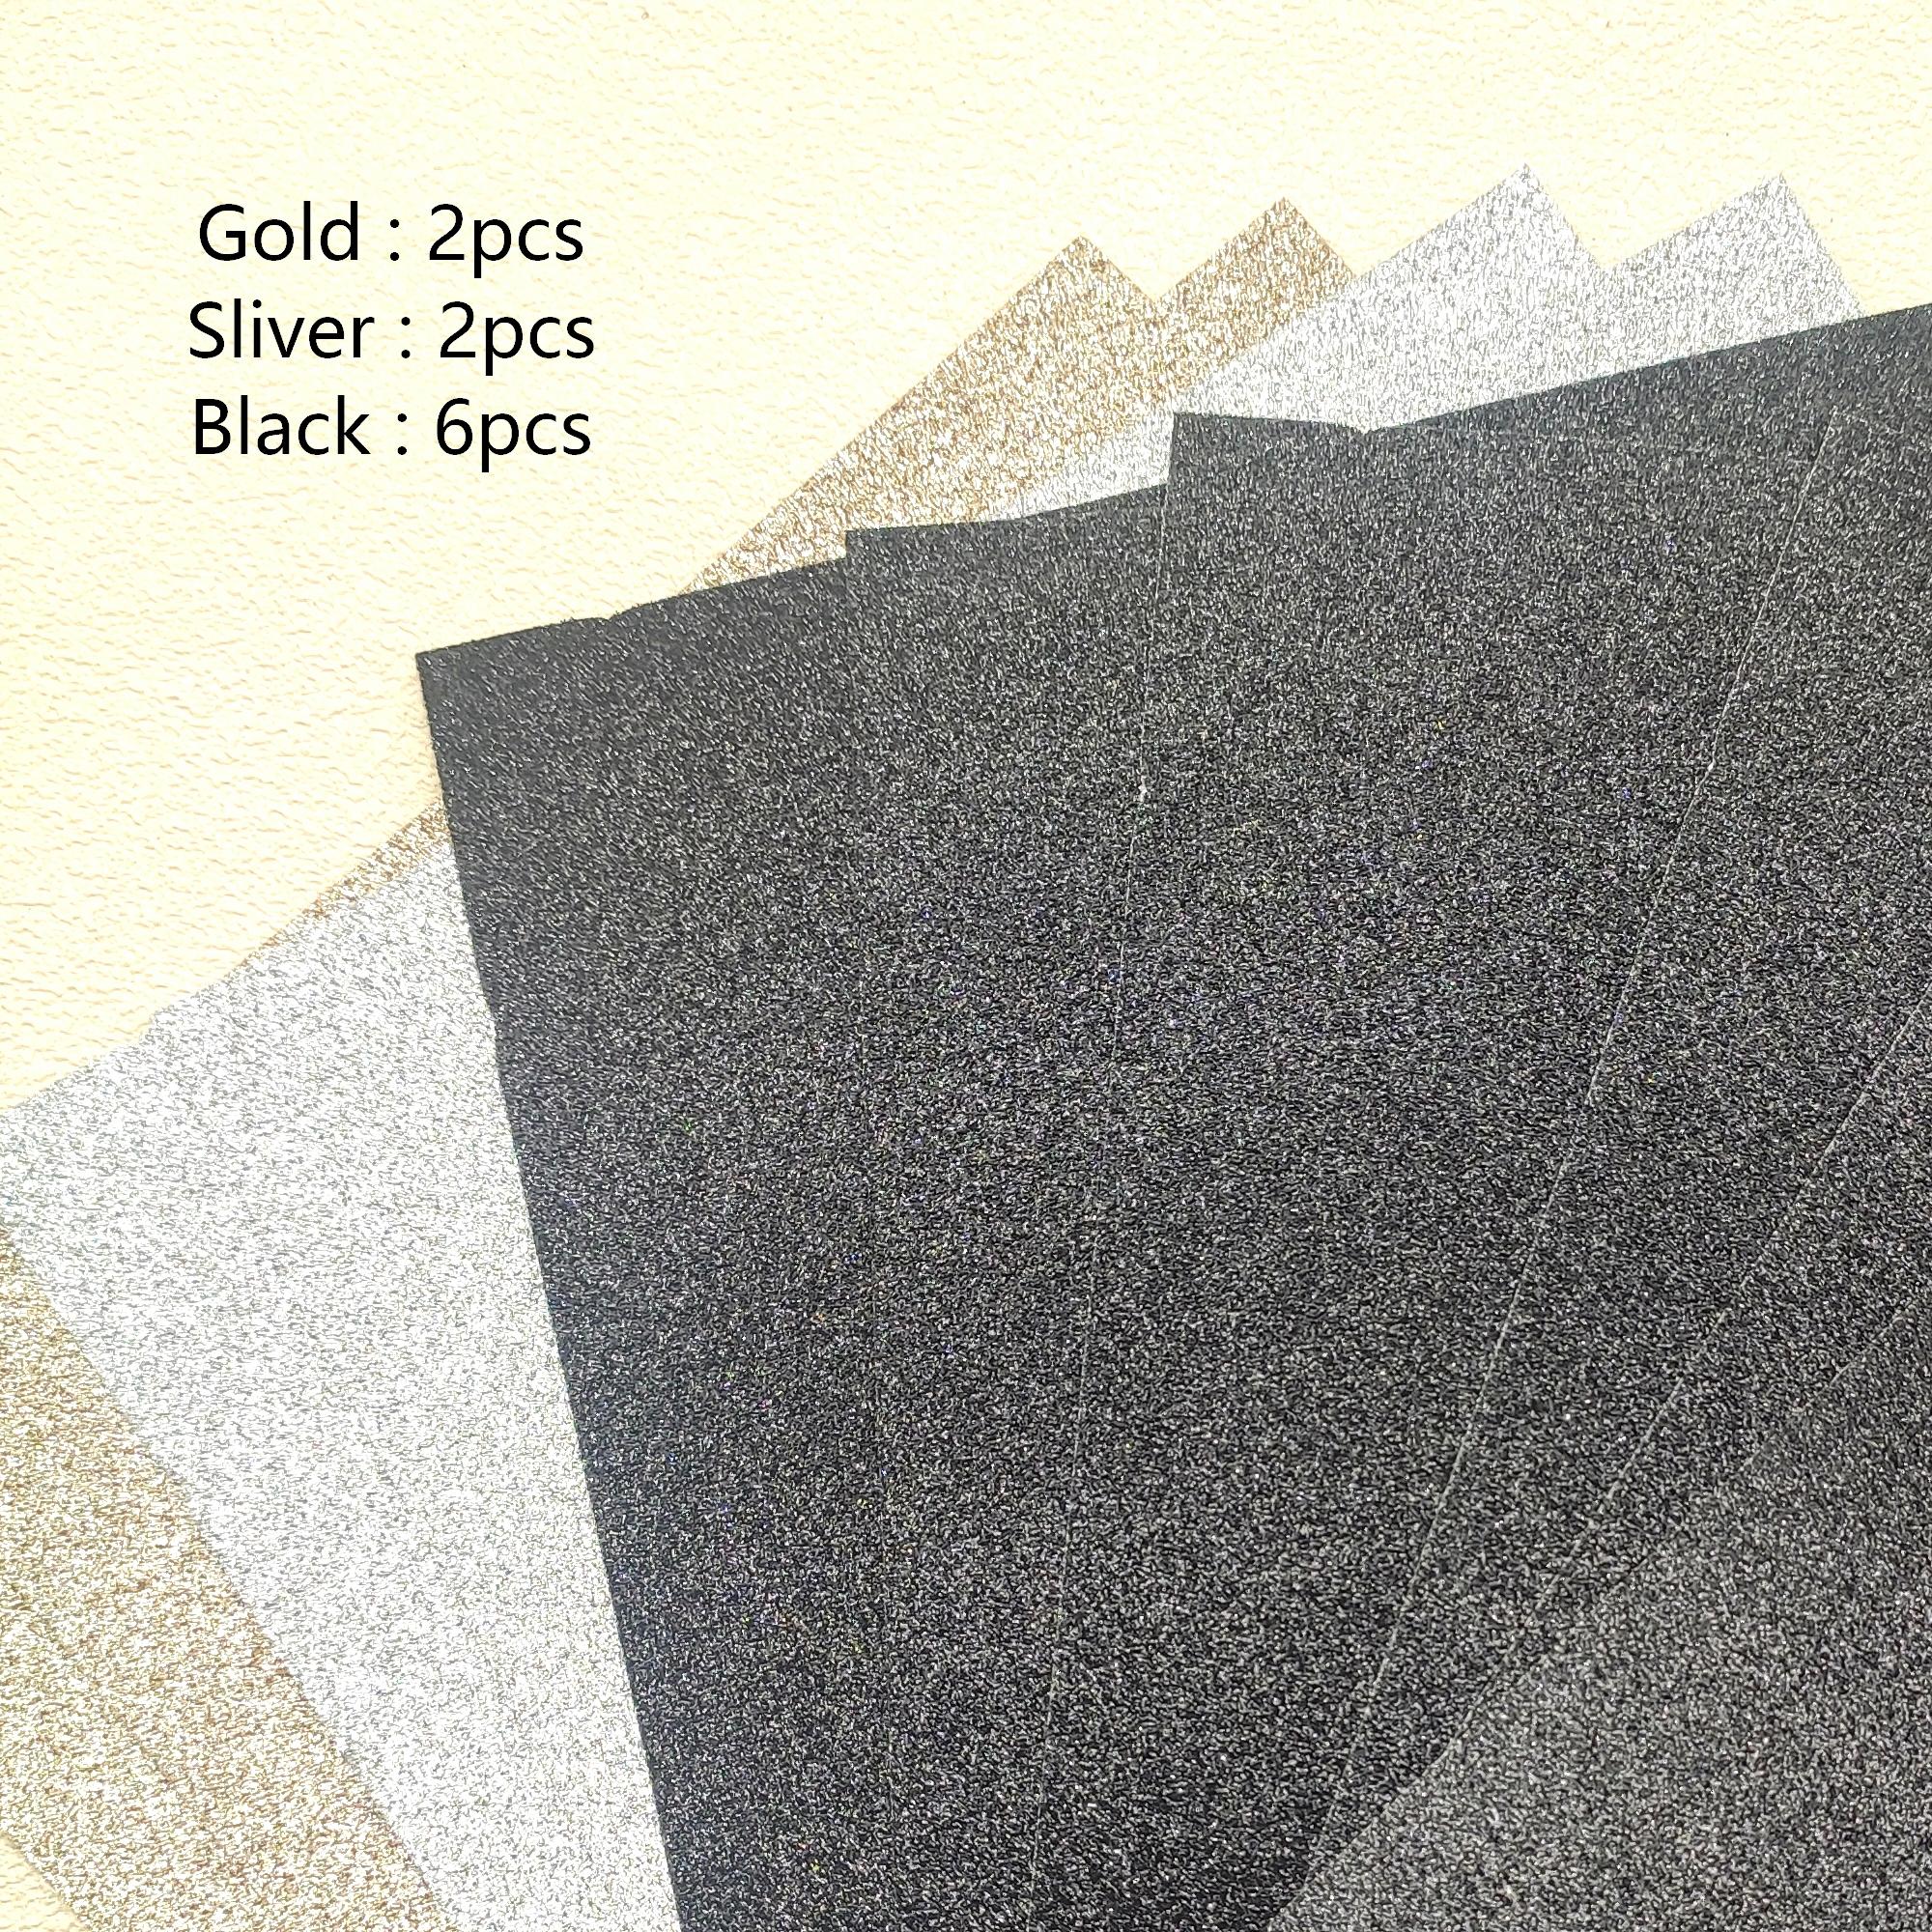 Non-Shed Glitter Cardstock 12X12 1 sheet Emerald - 855697008668